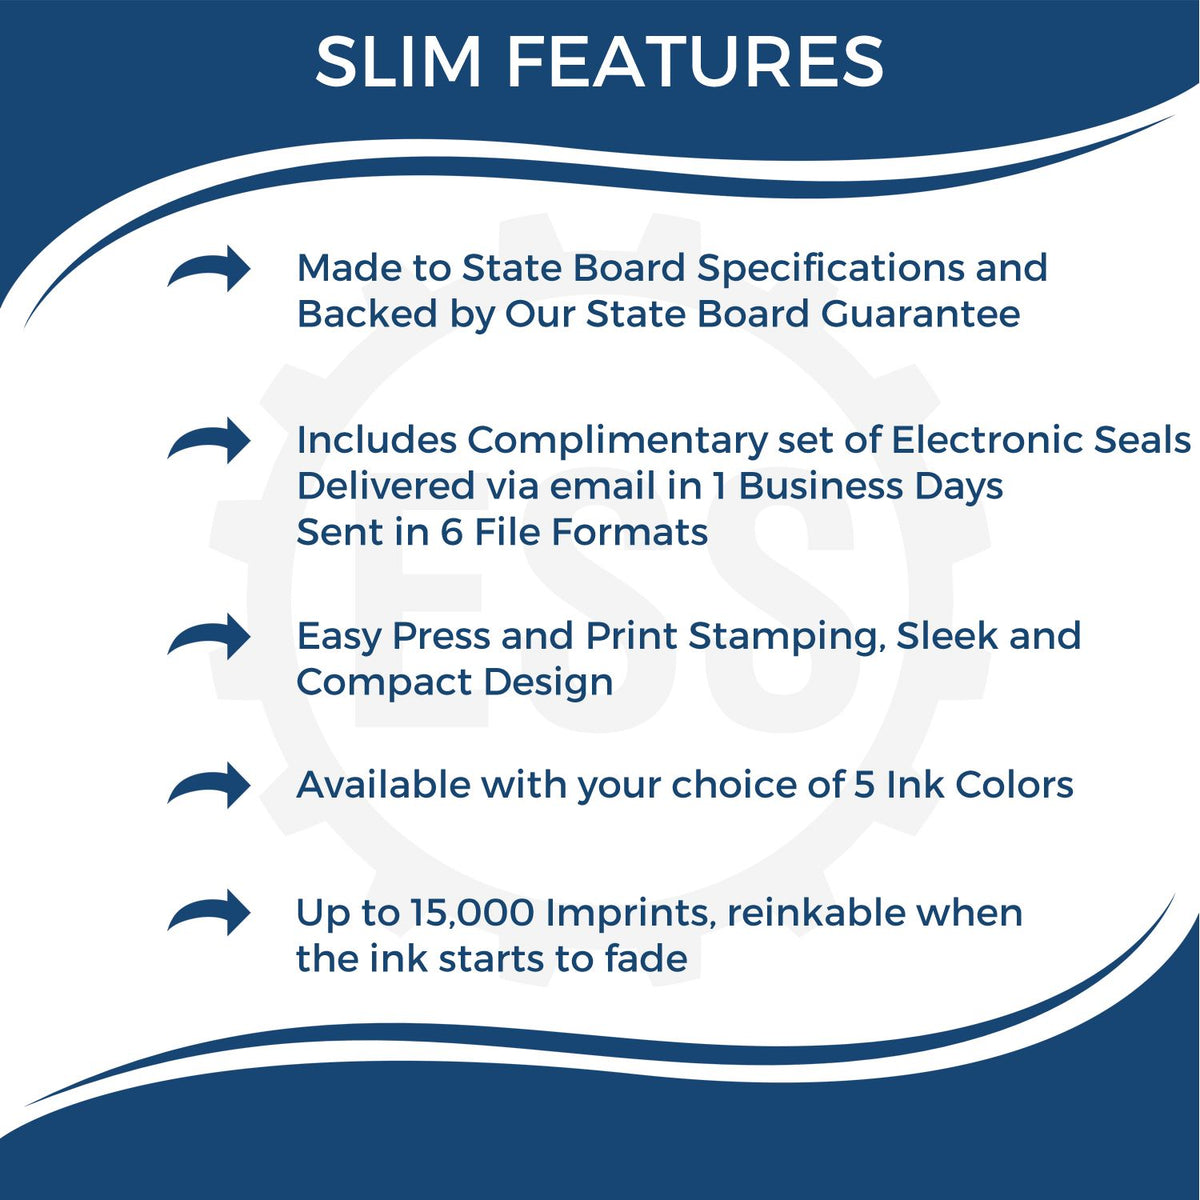 A picture of an infographic highlighting the selling points for the Super Slim Guam Notary Public Stamp